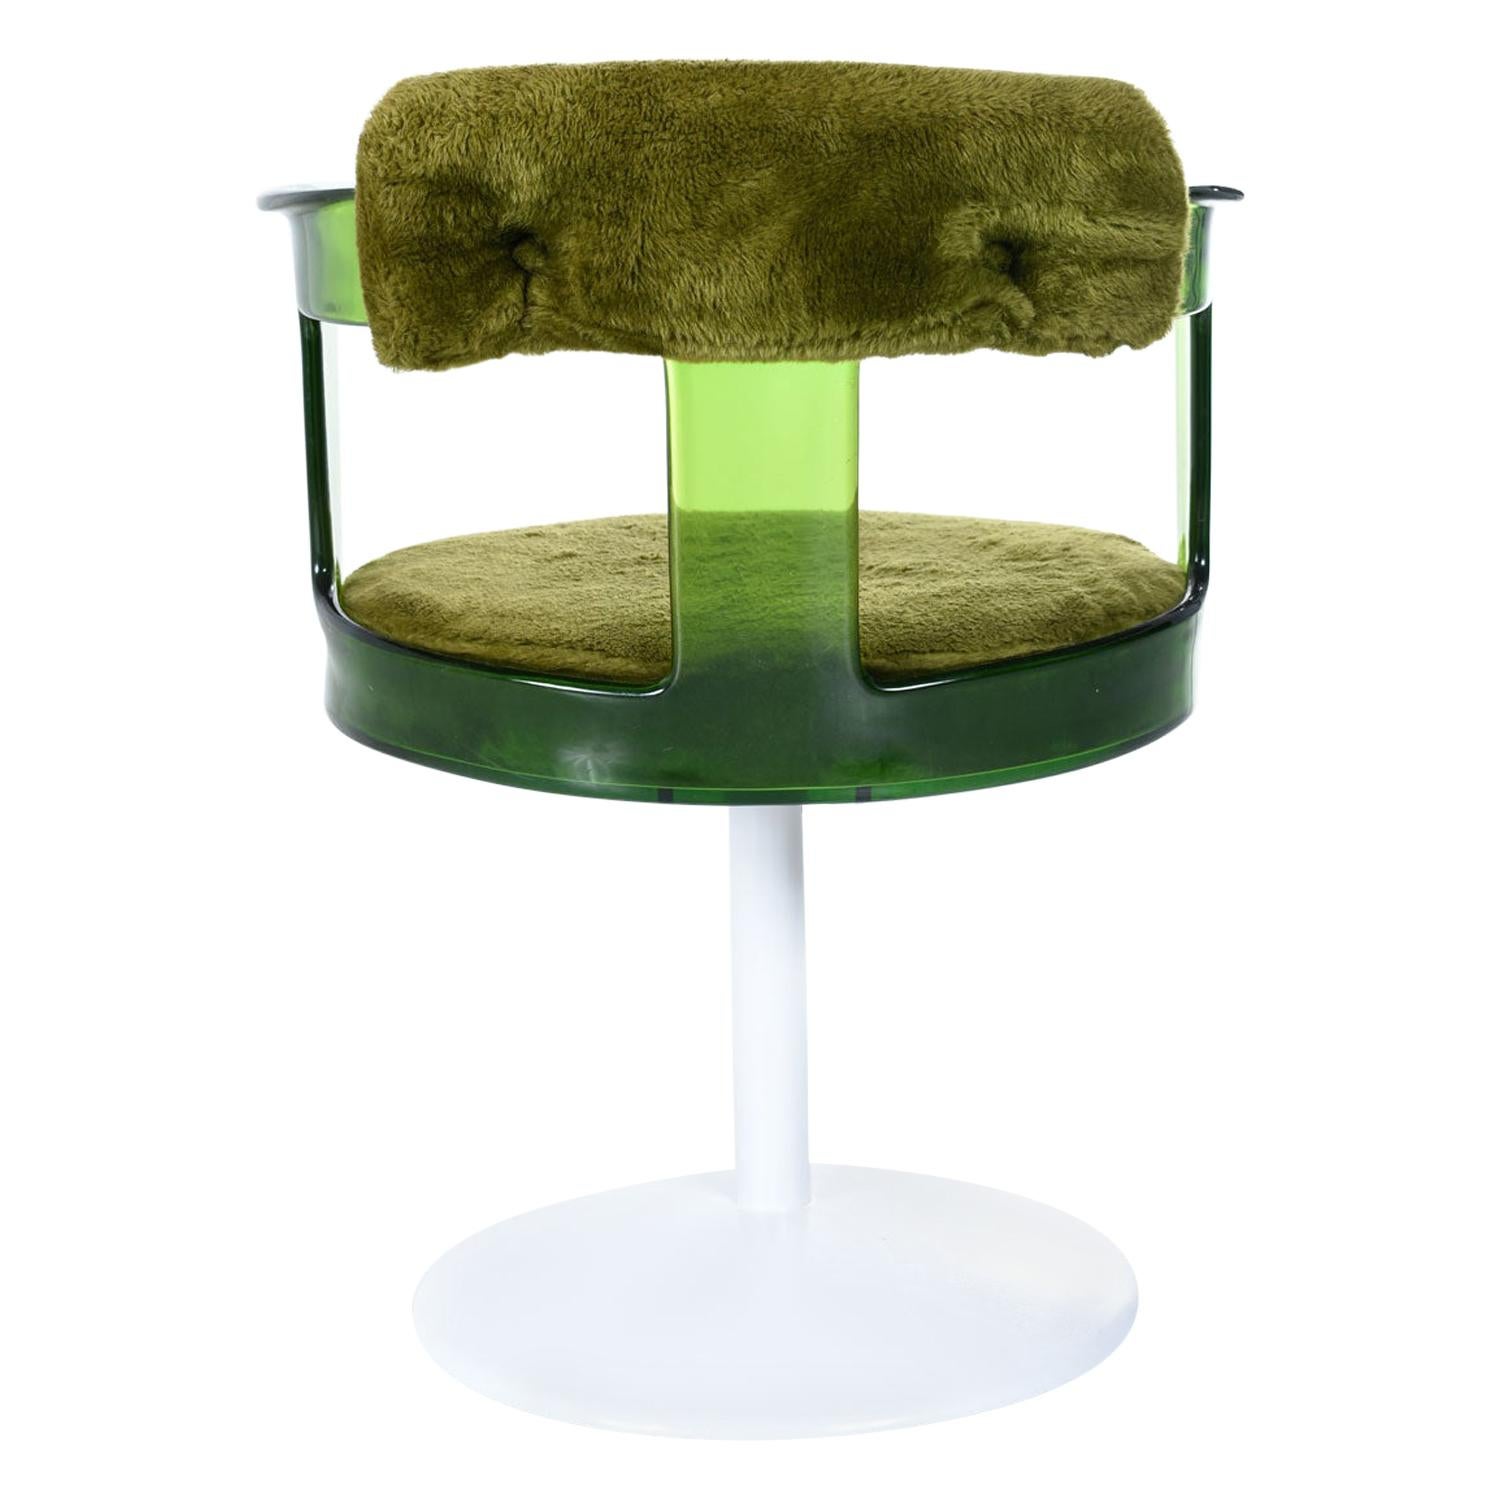 This vintage 1970s chair by Daystrom has everything we love about the era. Oscar The Grouch green faux fur make this Daystrom tulip impart a nostalgic charm. The padded upper backrest and seat and a slight backward pitch for relaxed sitting. The